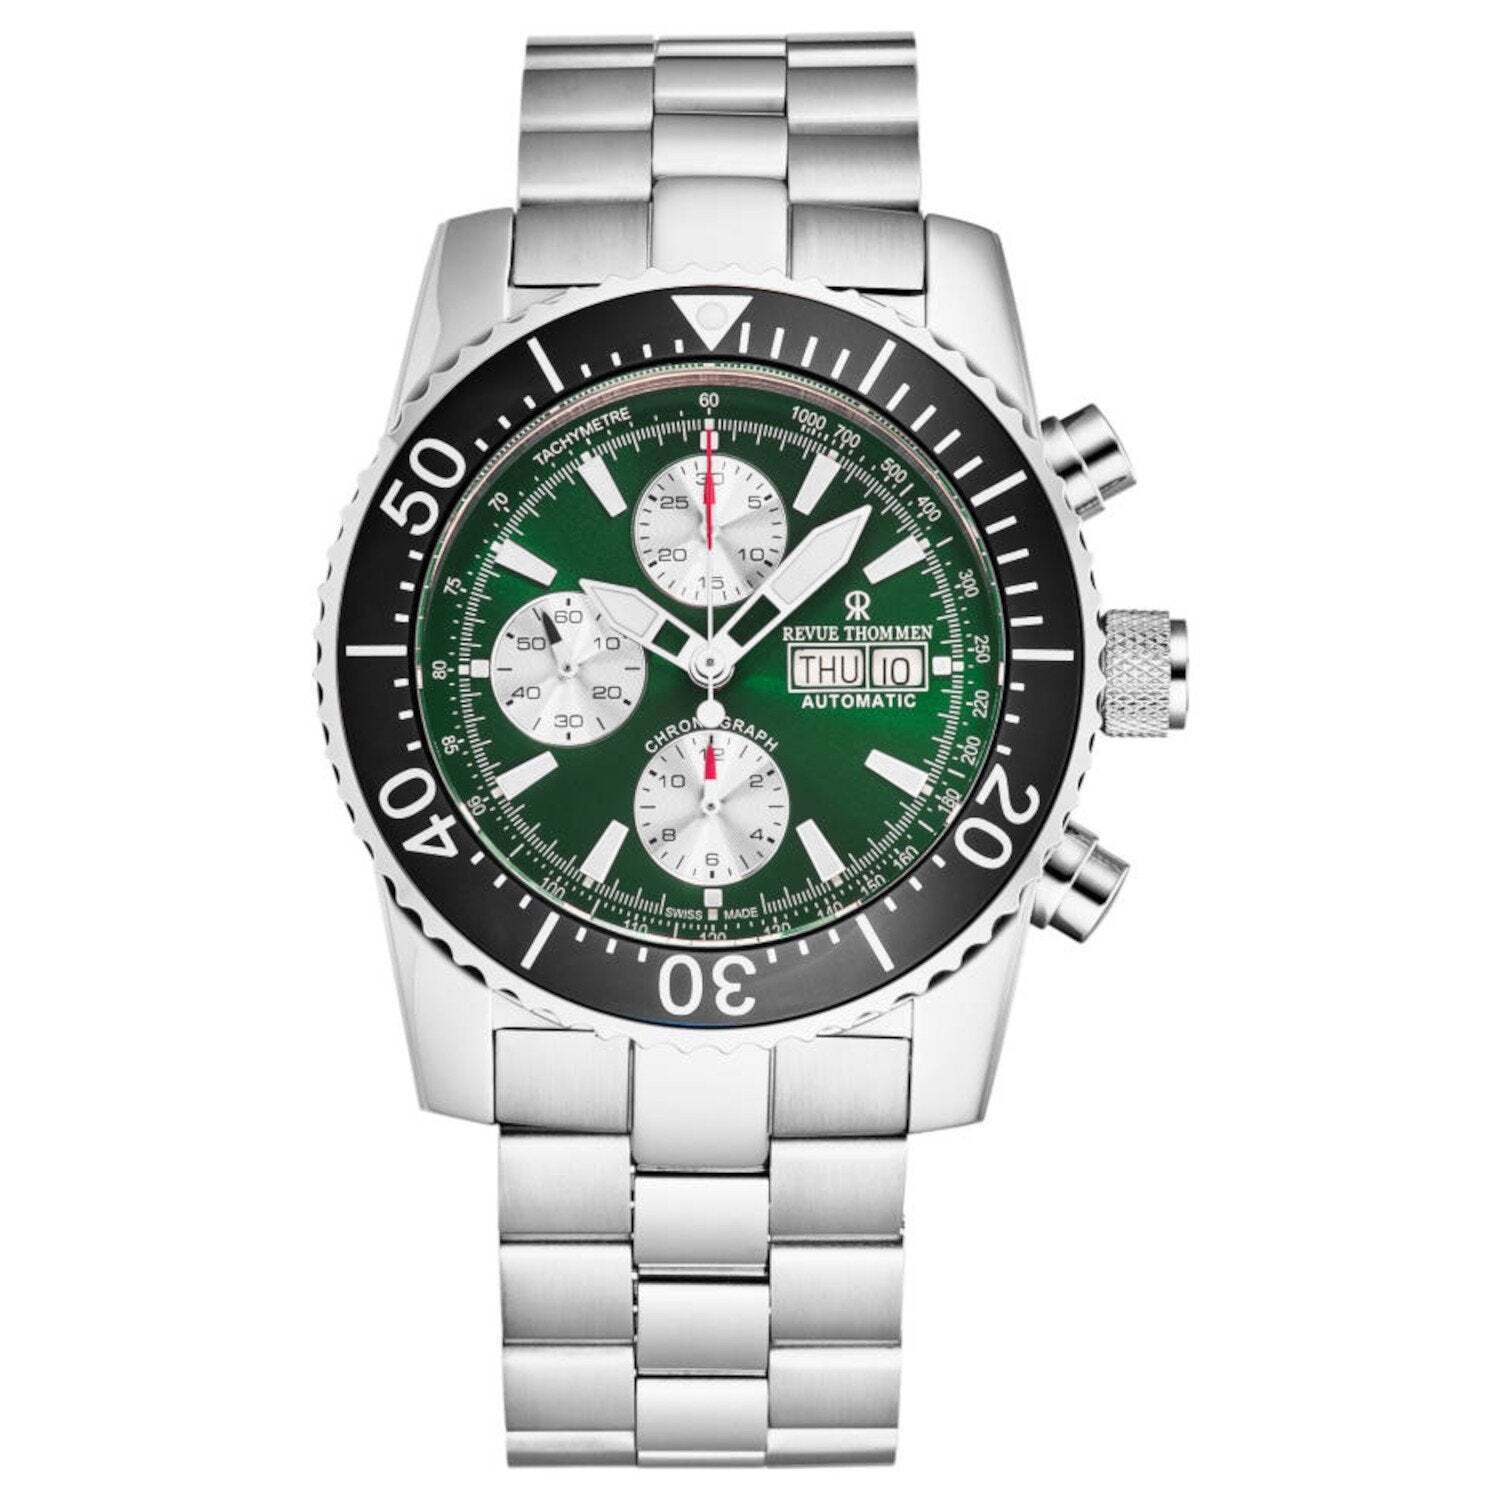 Revue Thommen 17030.6121 Men's 'Divers' Green Dial Day-Date Chronograph Automatic Watch